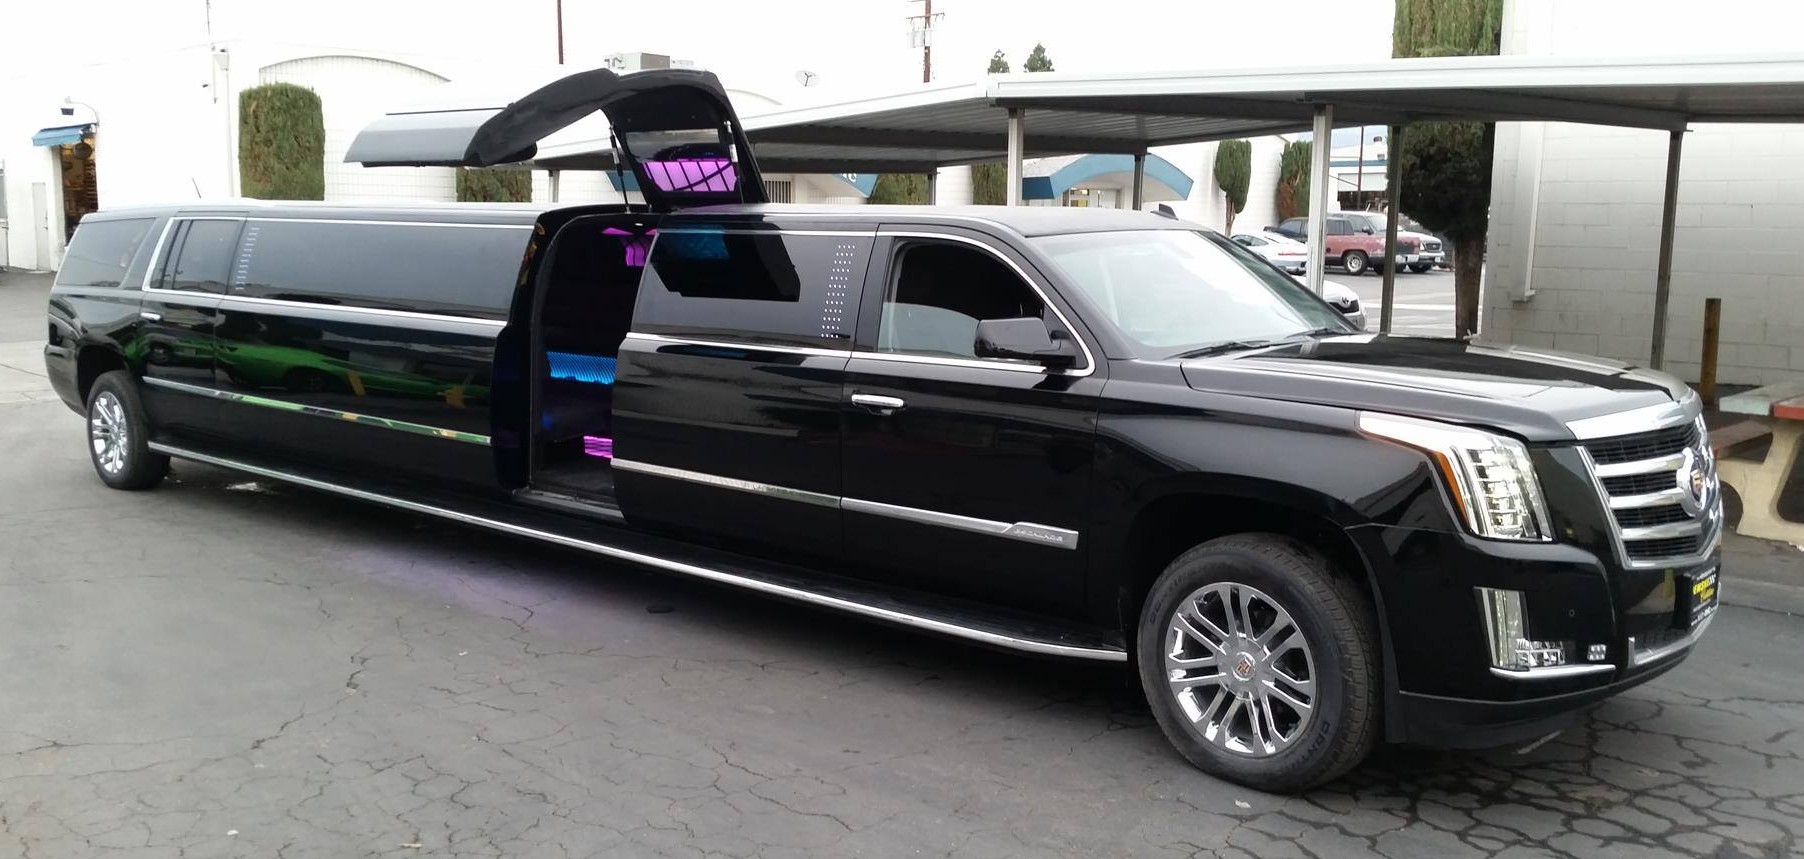 What You Need to Know About Lansing Limo?